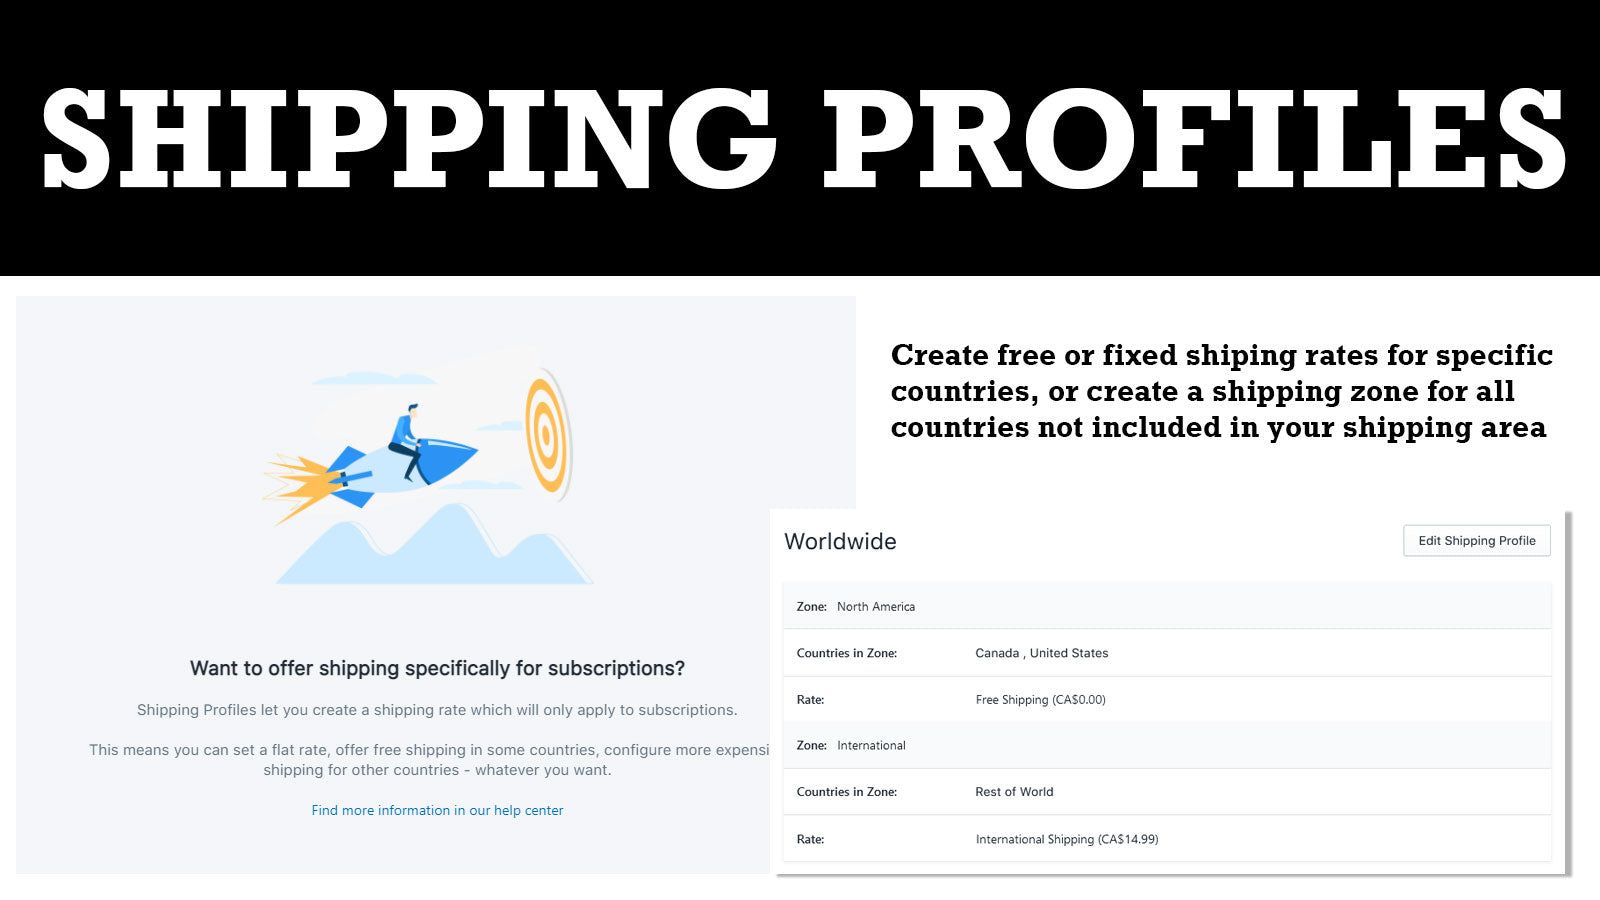 Create free or fixed shipping rates exclusive to subscriptions